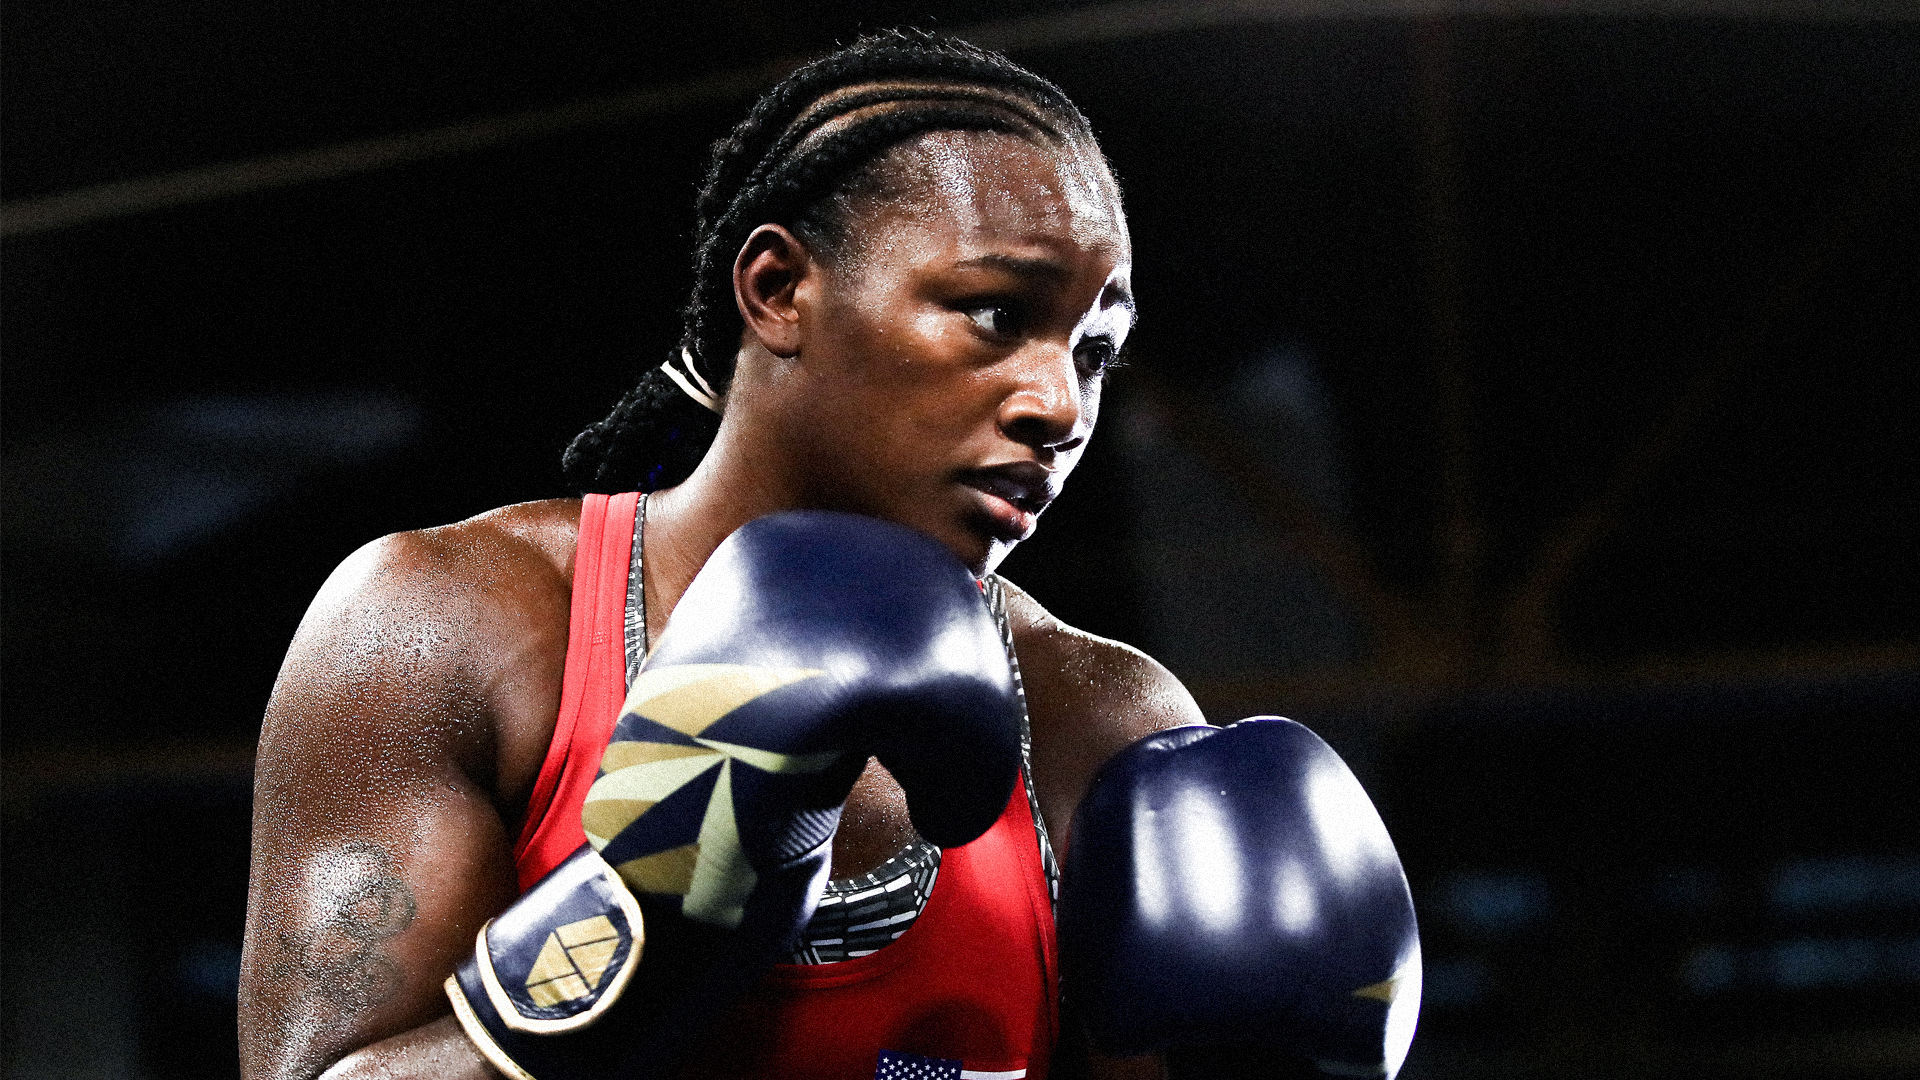 Claressa Shields Wins On MMA Debut, Five Boxing Stories You Might Have